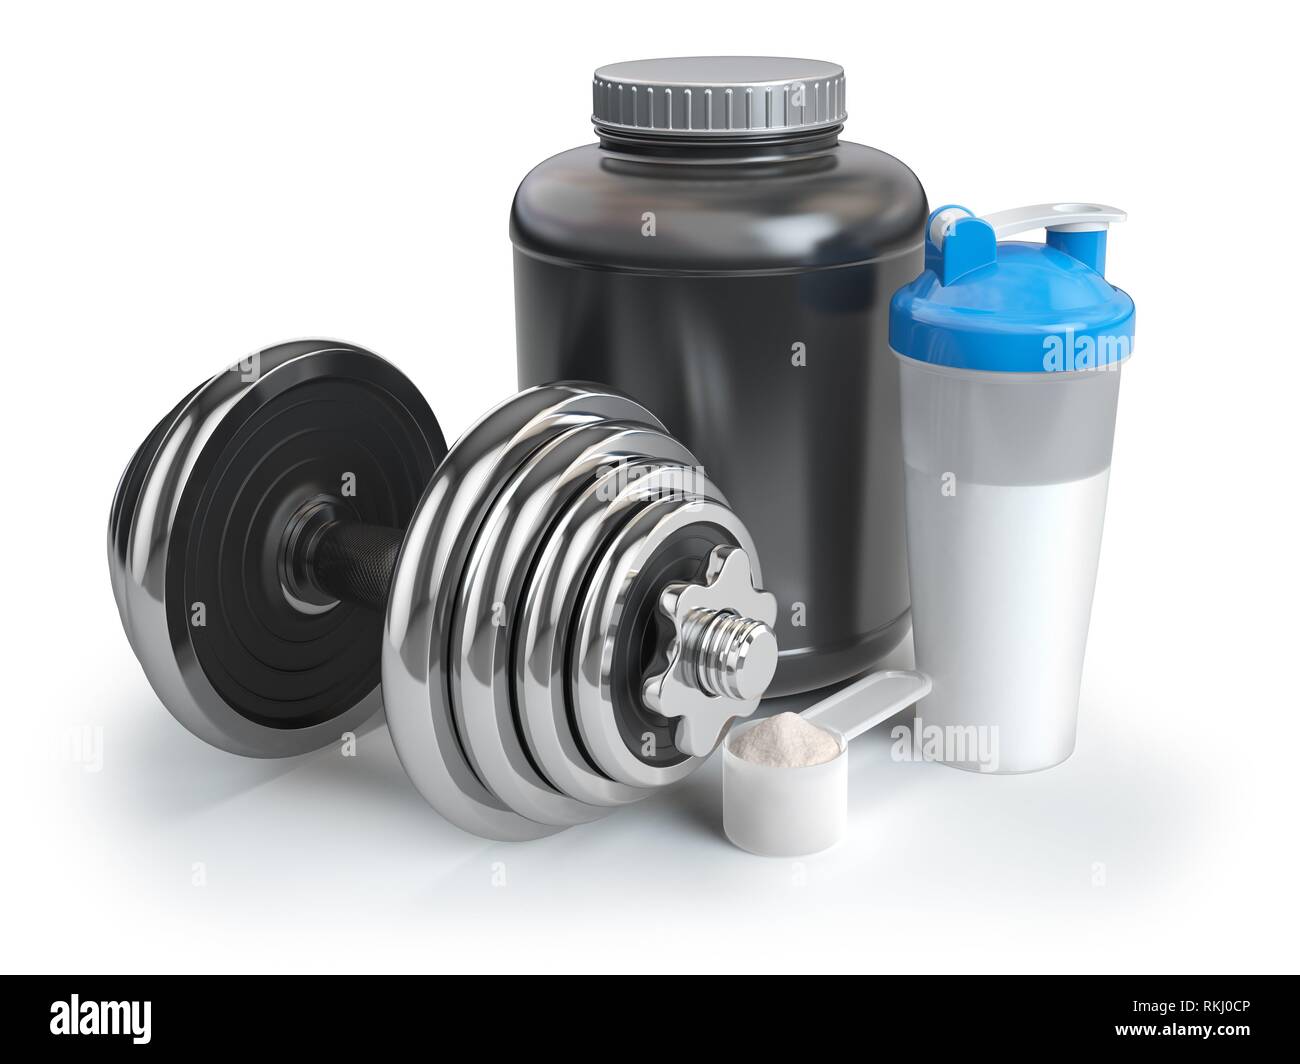 Shaker And Protein Powder Stock Photo - Download Image Now